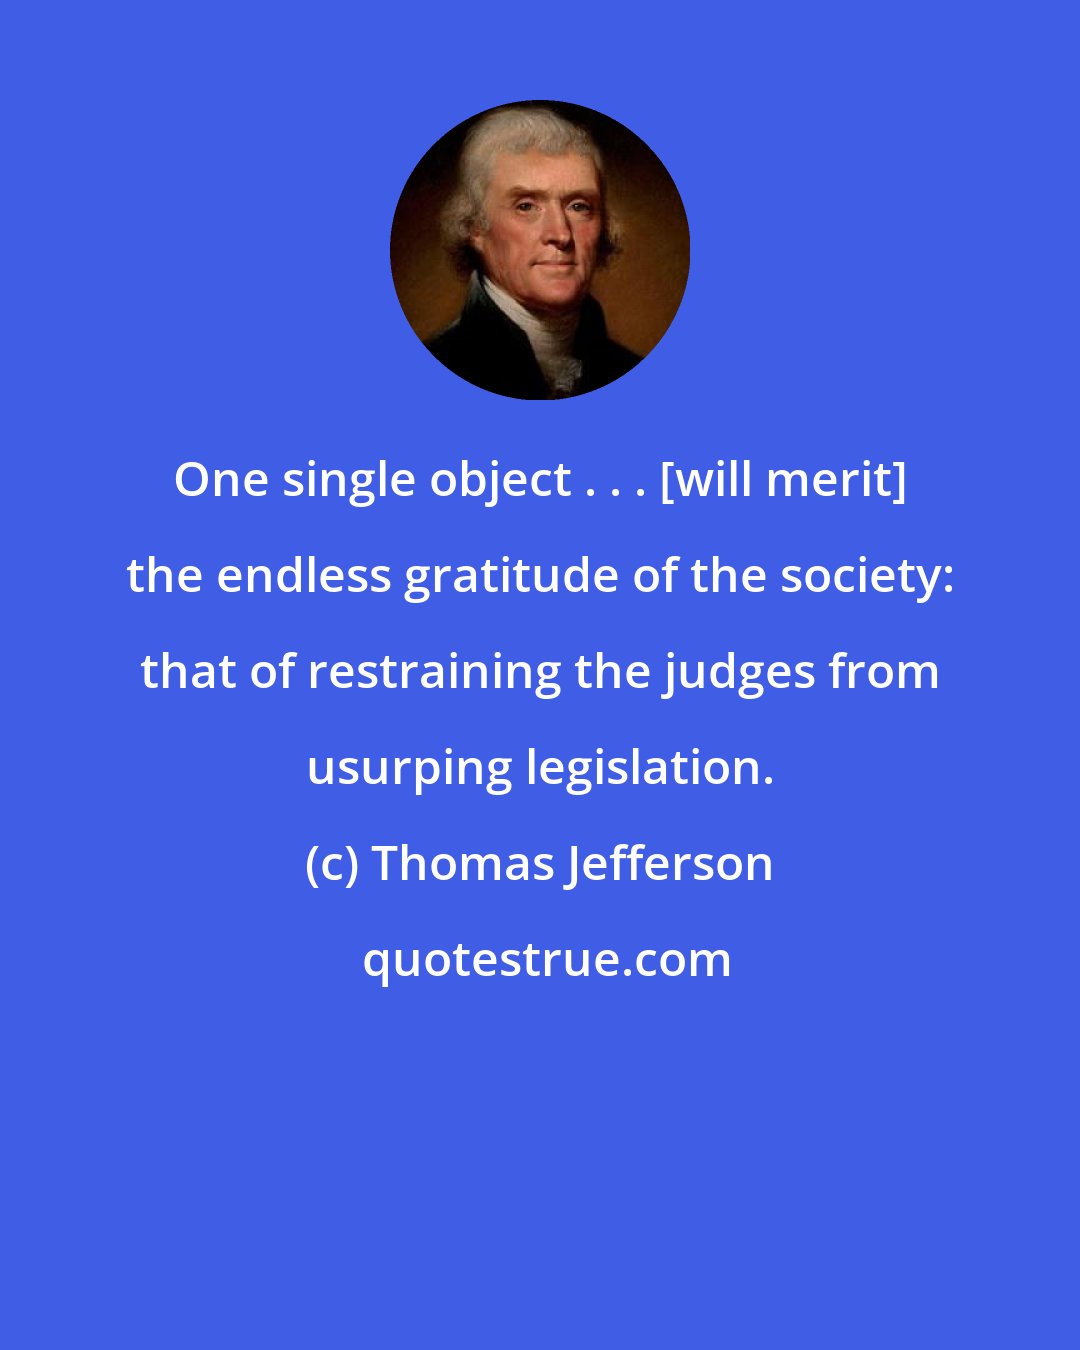 Thomas Jefferson: One single object . . . [will merit] the endless gratitude of the society: that of restraining the judges from usurping legislation.